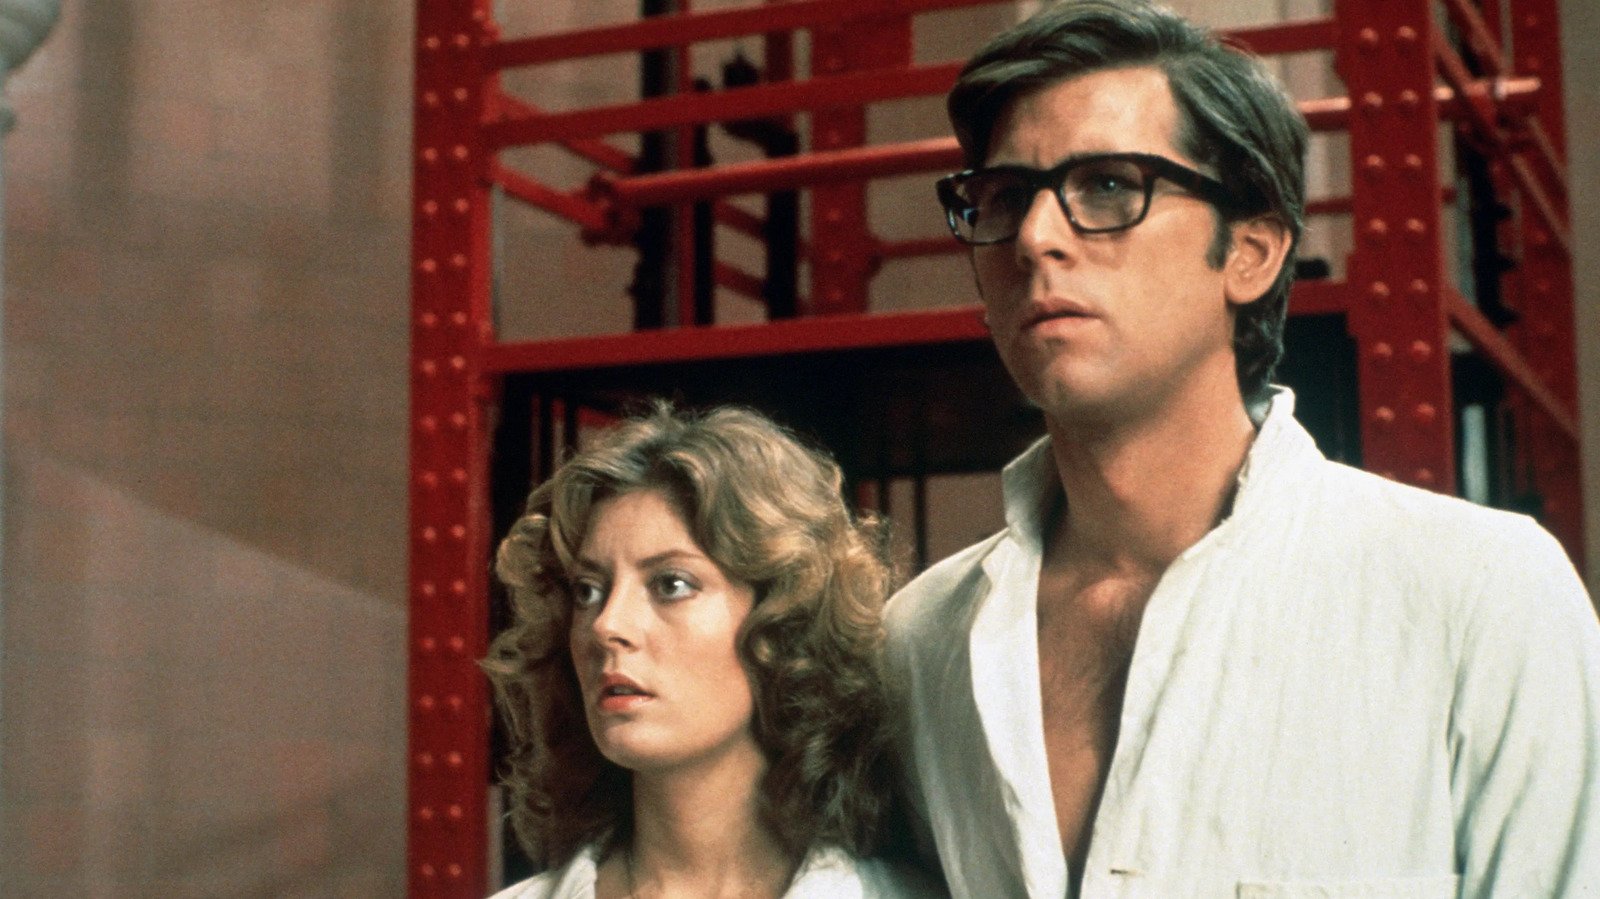 Barry Bostwick Didn't Mind Some Of His Songs Being Cut From Rocky Horror Picture Show - /Film